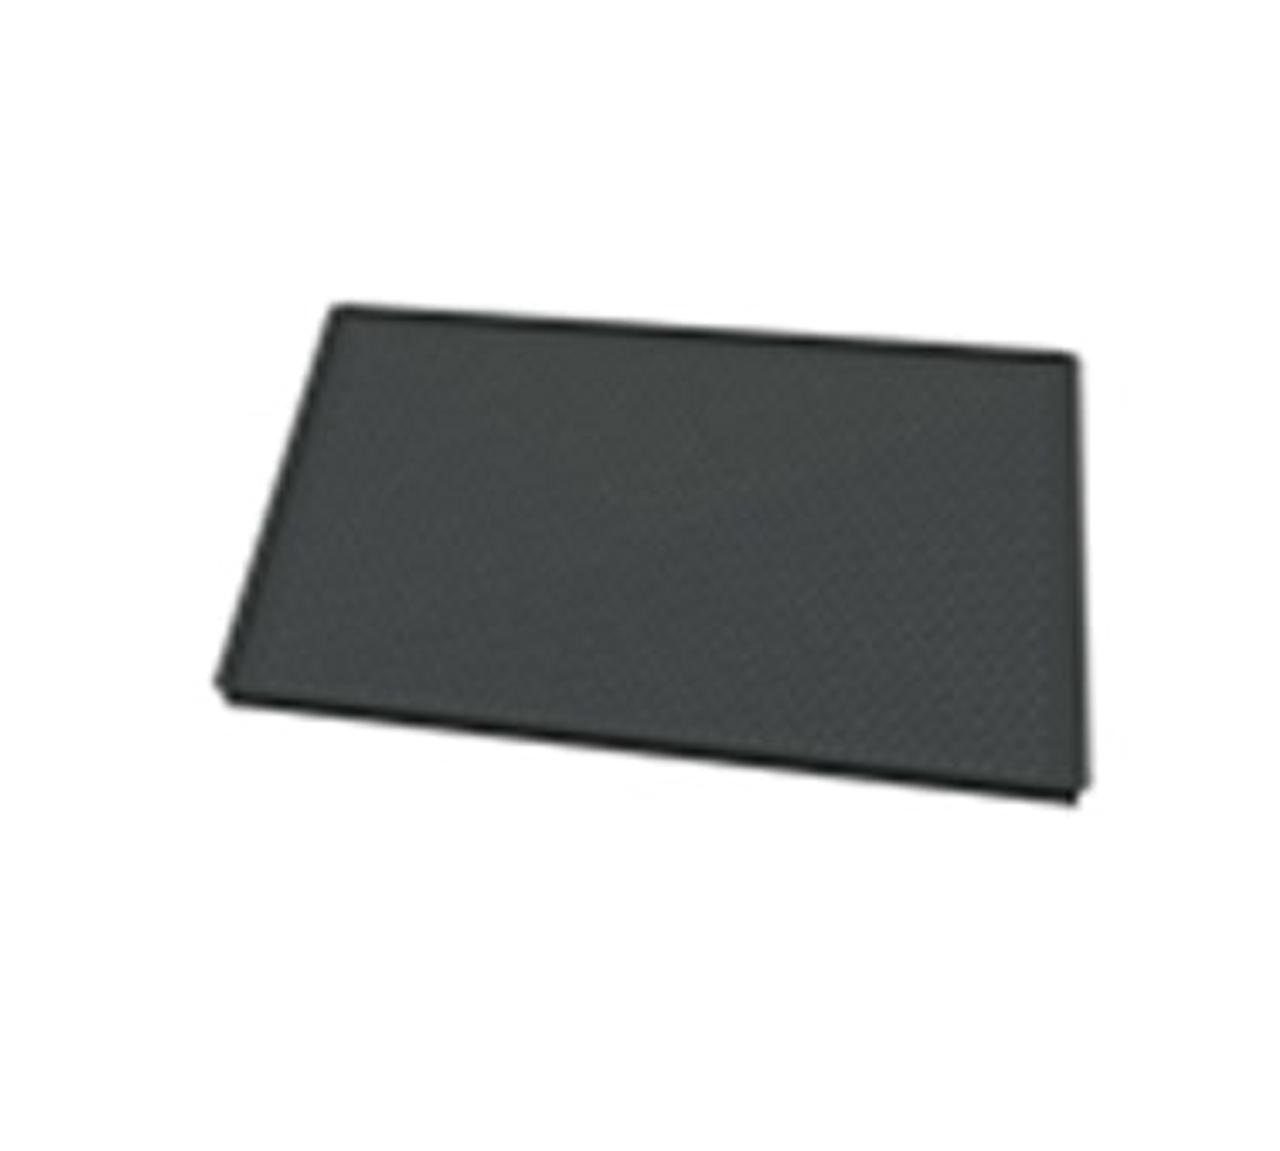 "FORO.BLACK" Non-Stick Perforated Aluminum pan, GN 1/1 12"x20", ideal for Croissants, Fresh Bread, Danish Pastries, Pastry